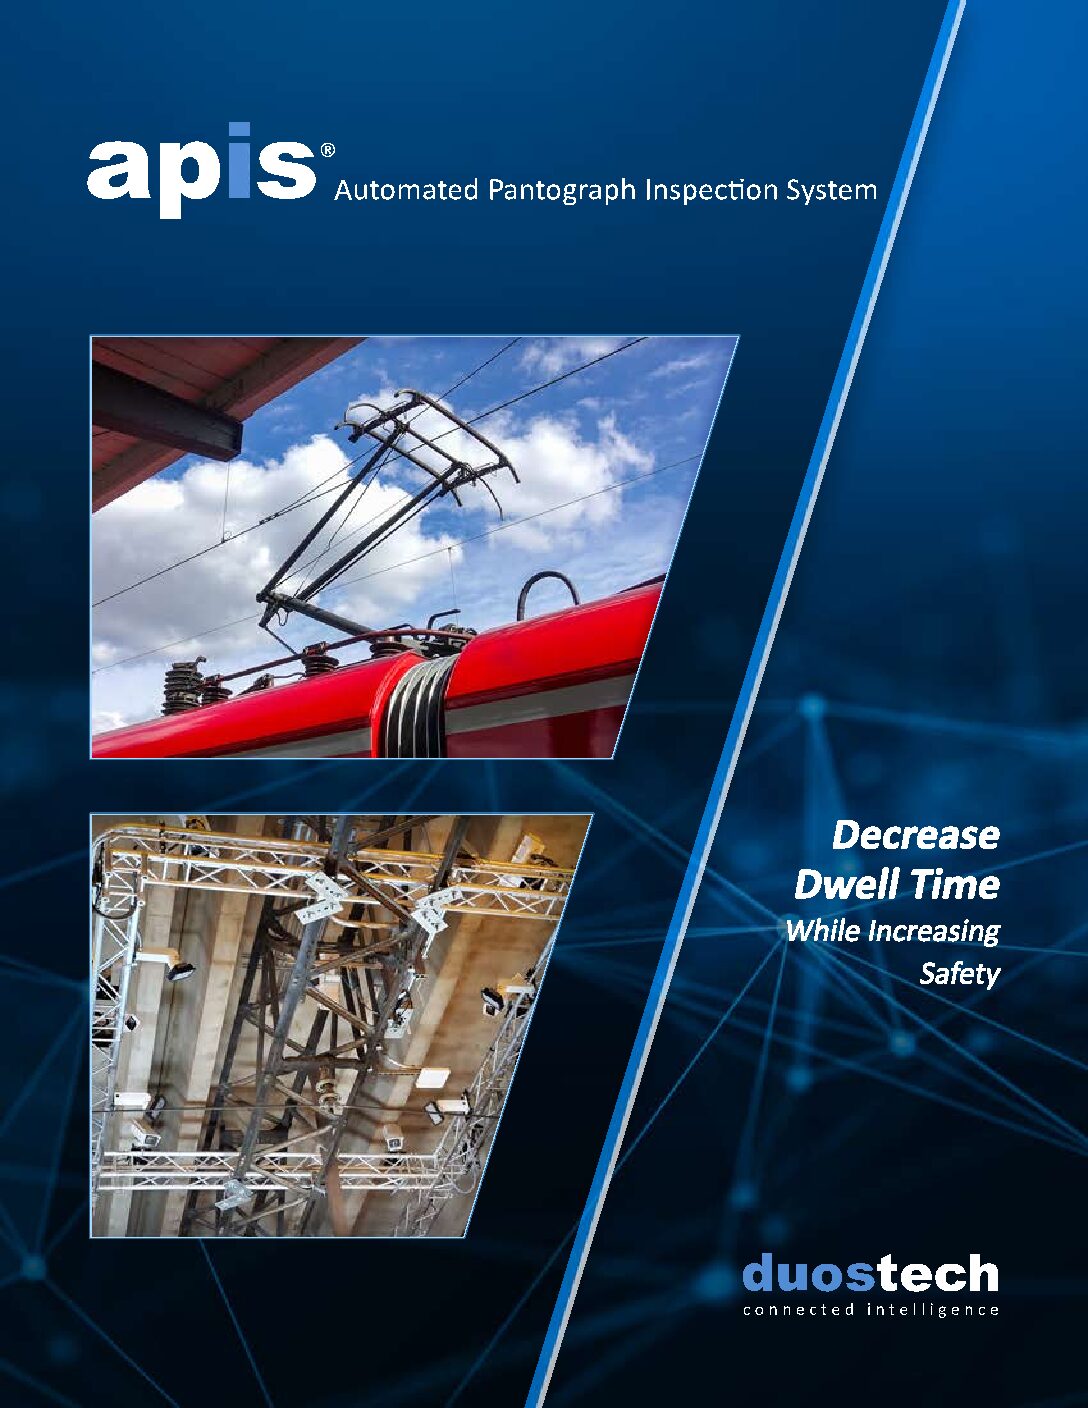 apis® – Automated Pantograph Inspection System